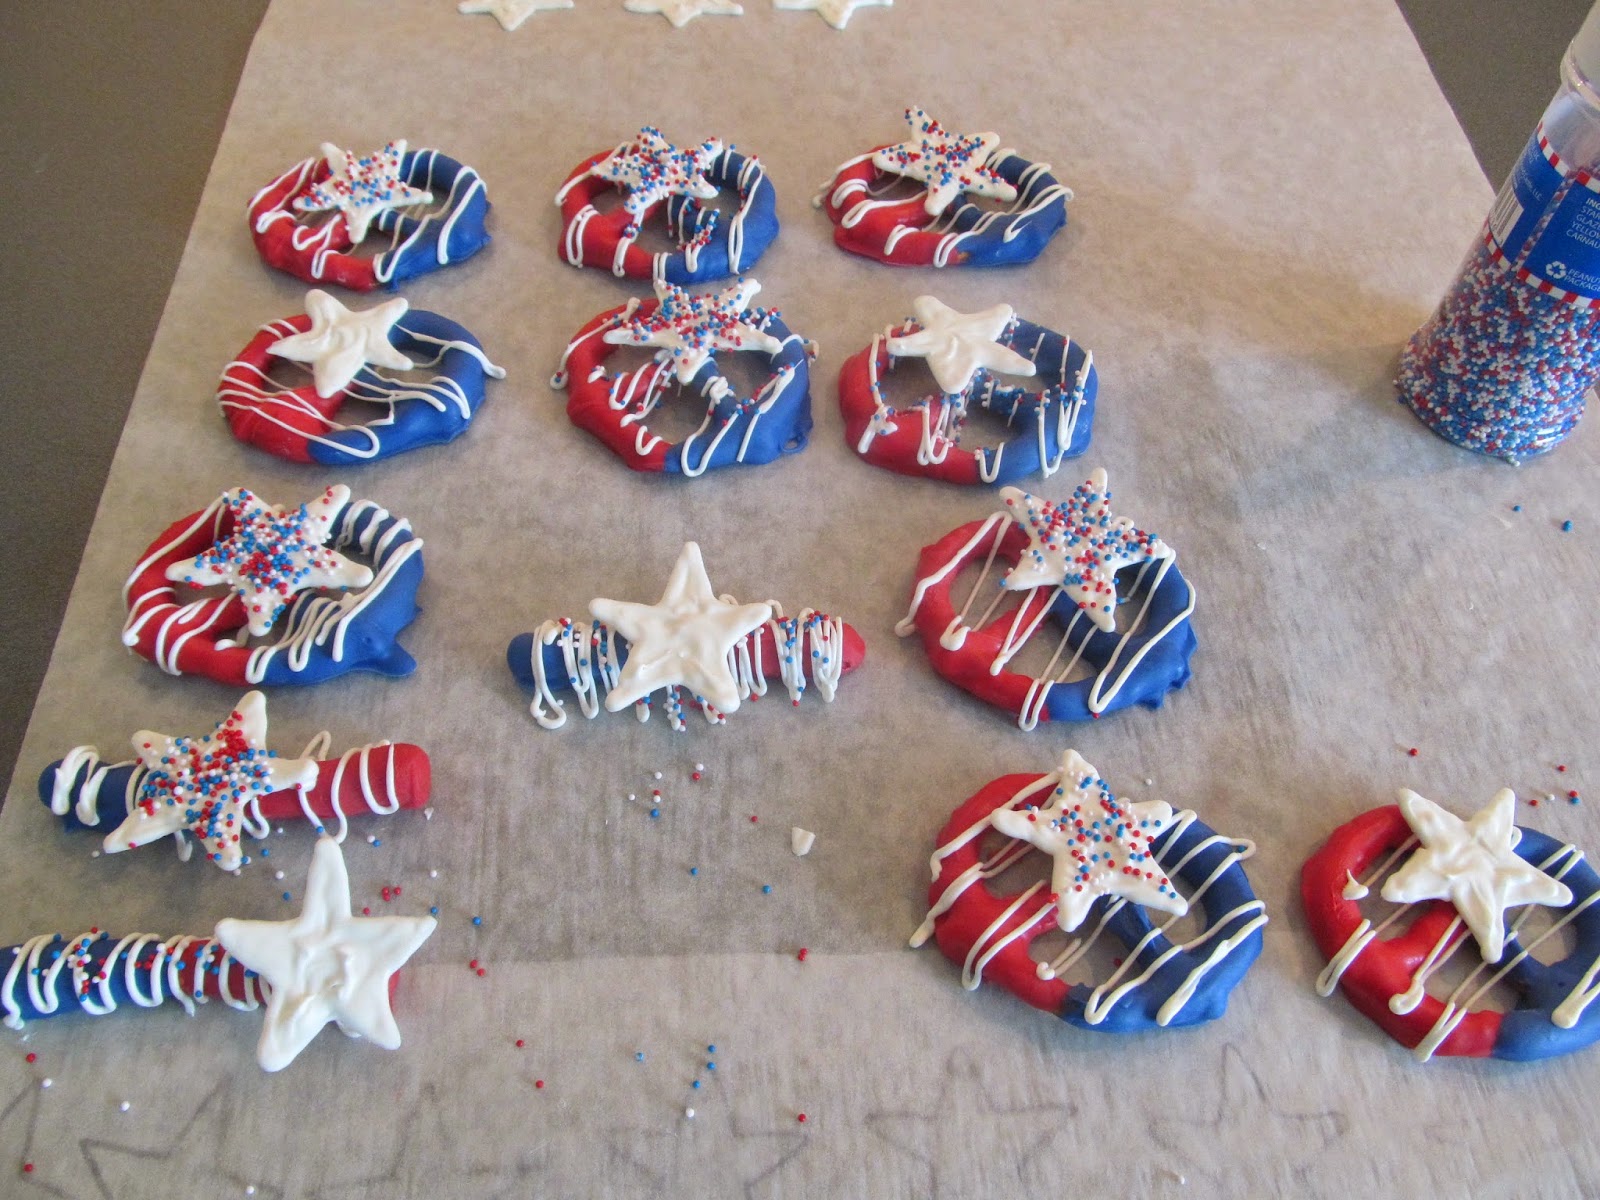 Red, White, and Blue pretzels